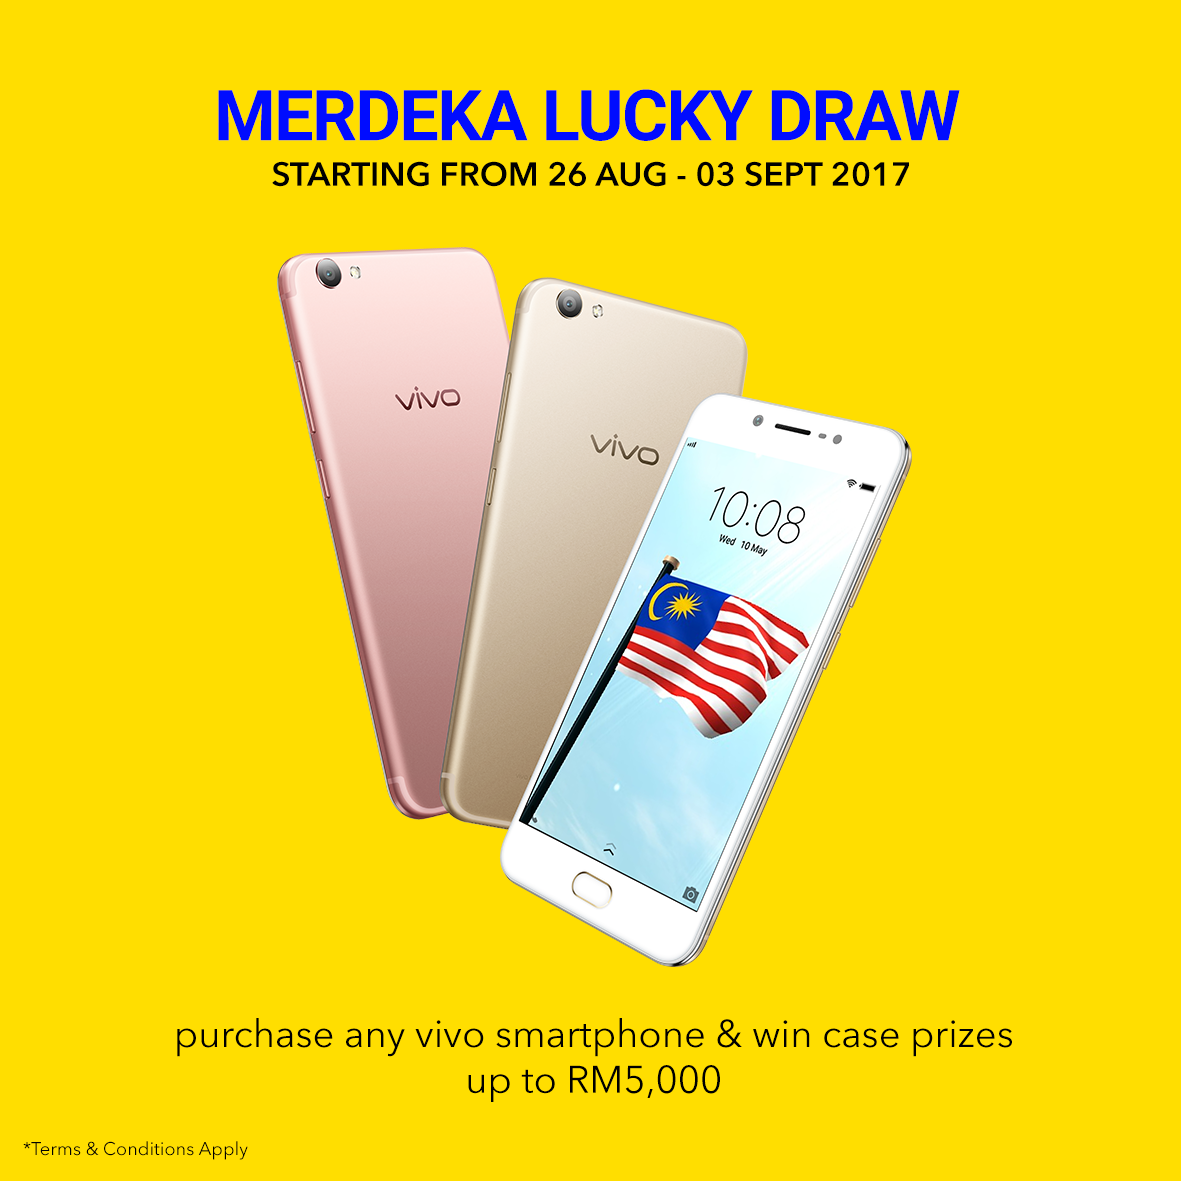 Win cash prizes up to RM5000 in vivo Merdeka Lucky Draw contest